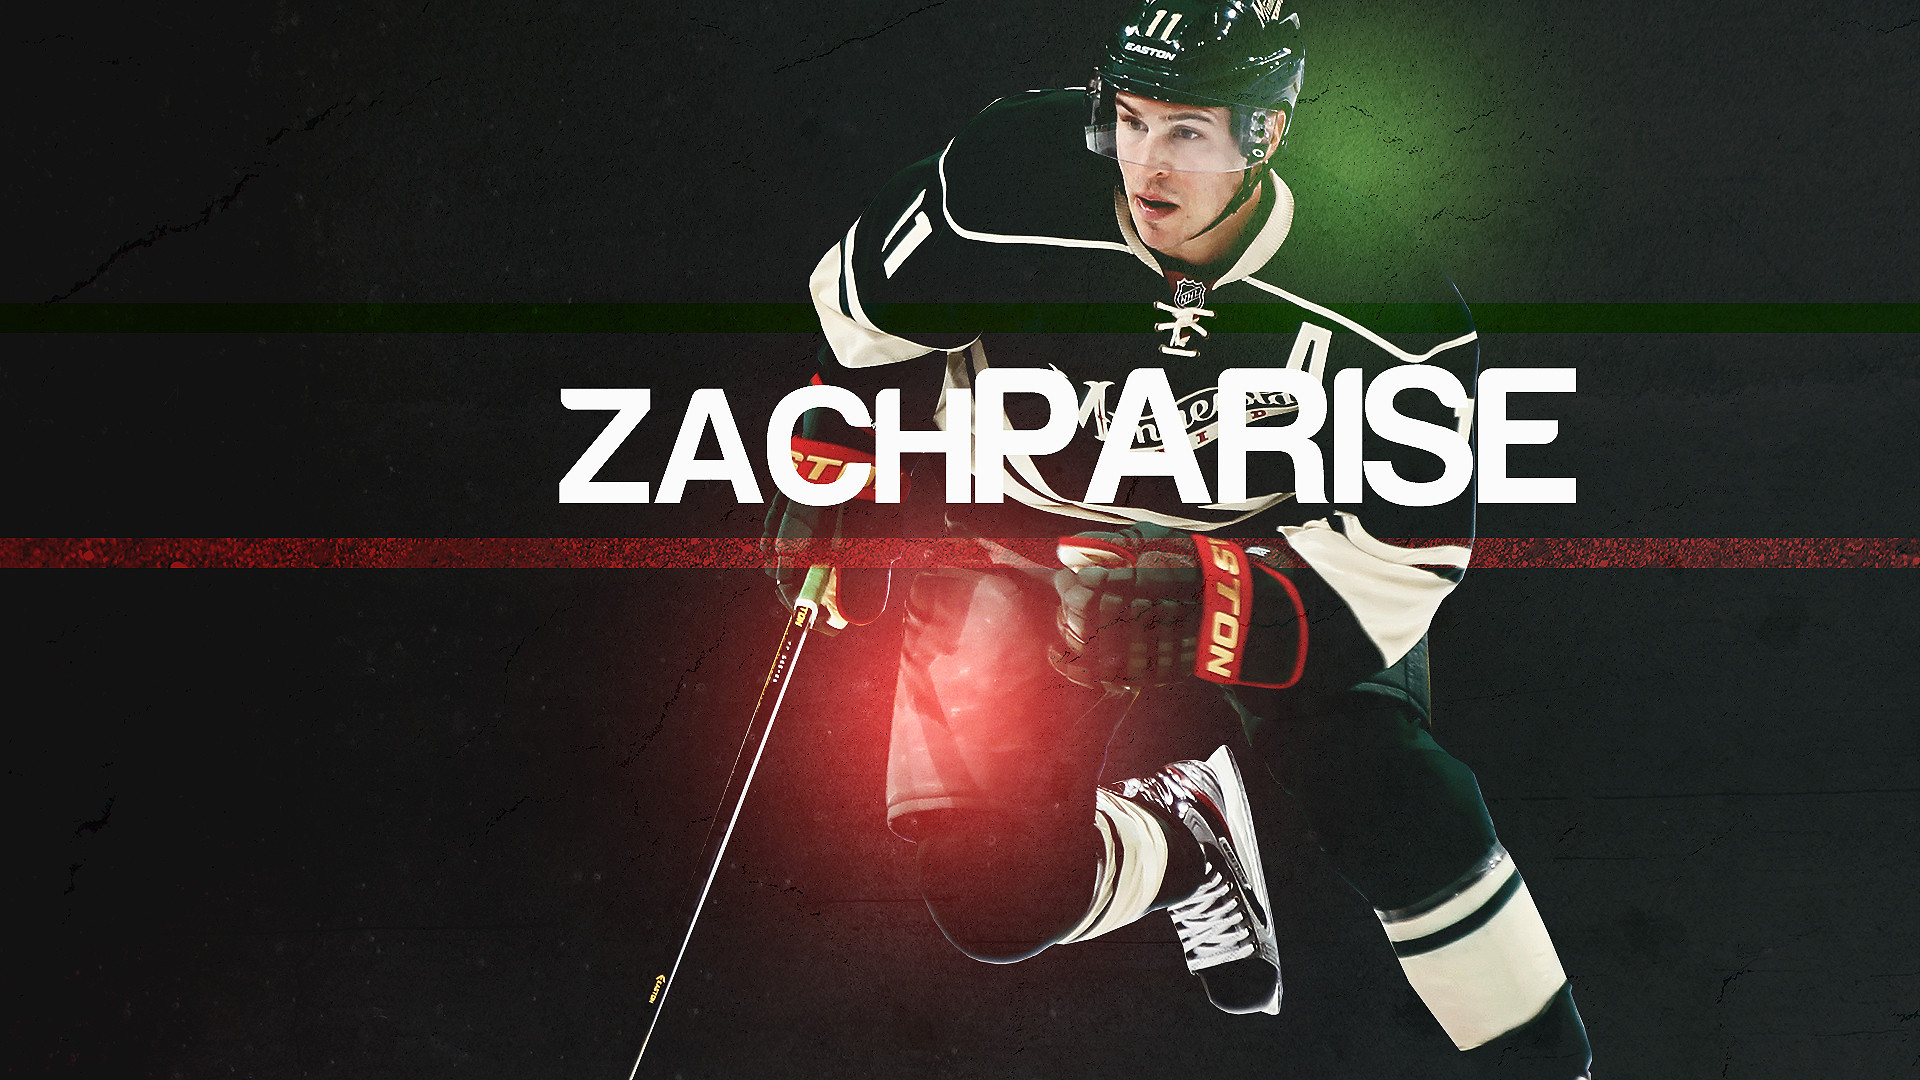 Minnesota Zach Parise wallpapers and images - wallpapers, pictures ...